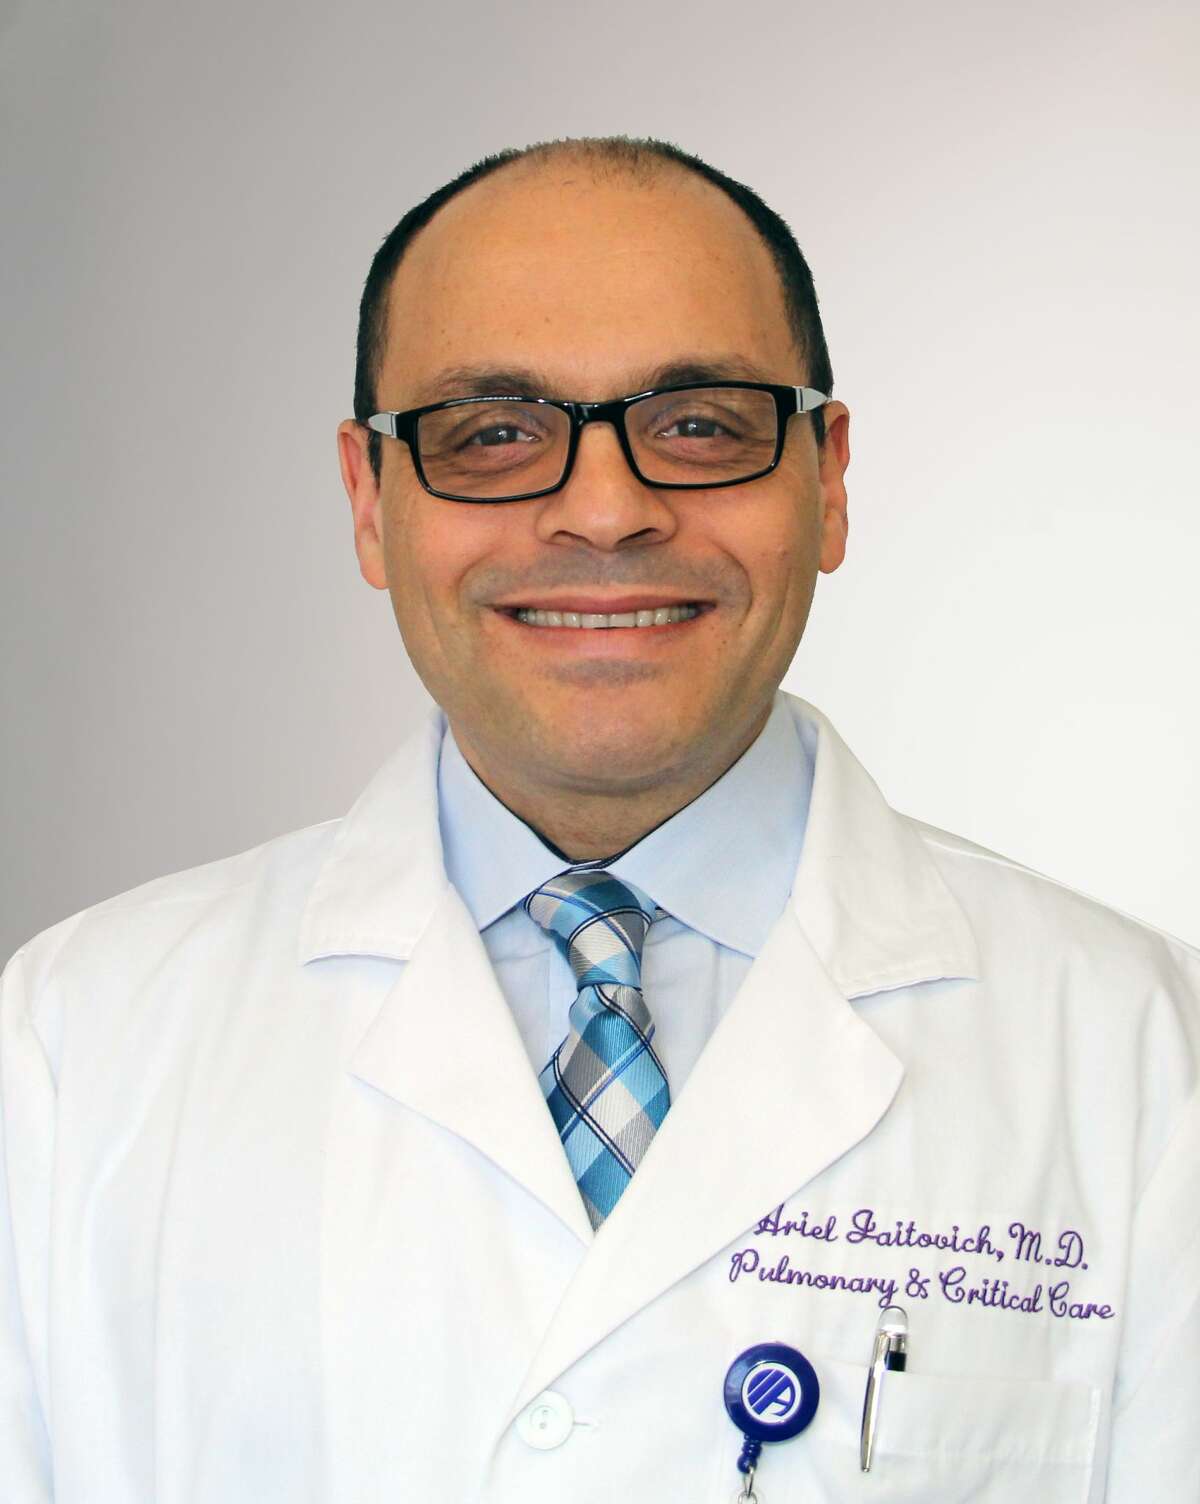 Dr. Ariel Jaitovich, a pulmonary and critical care doctor, has treated some of Albany Medical Center's most severe COVID-19 patients.